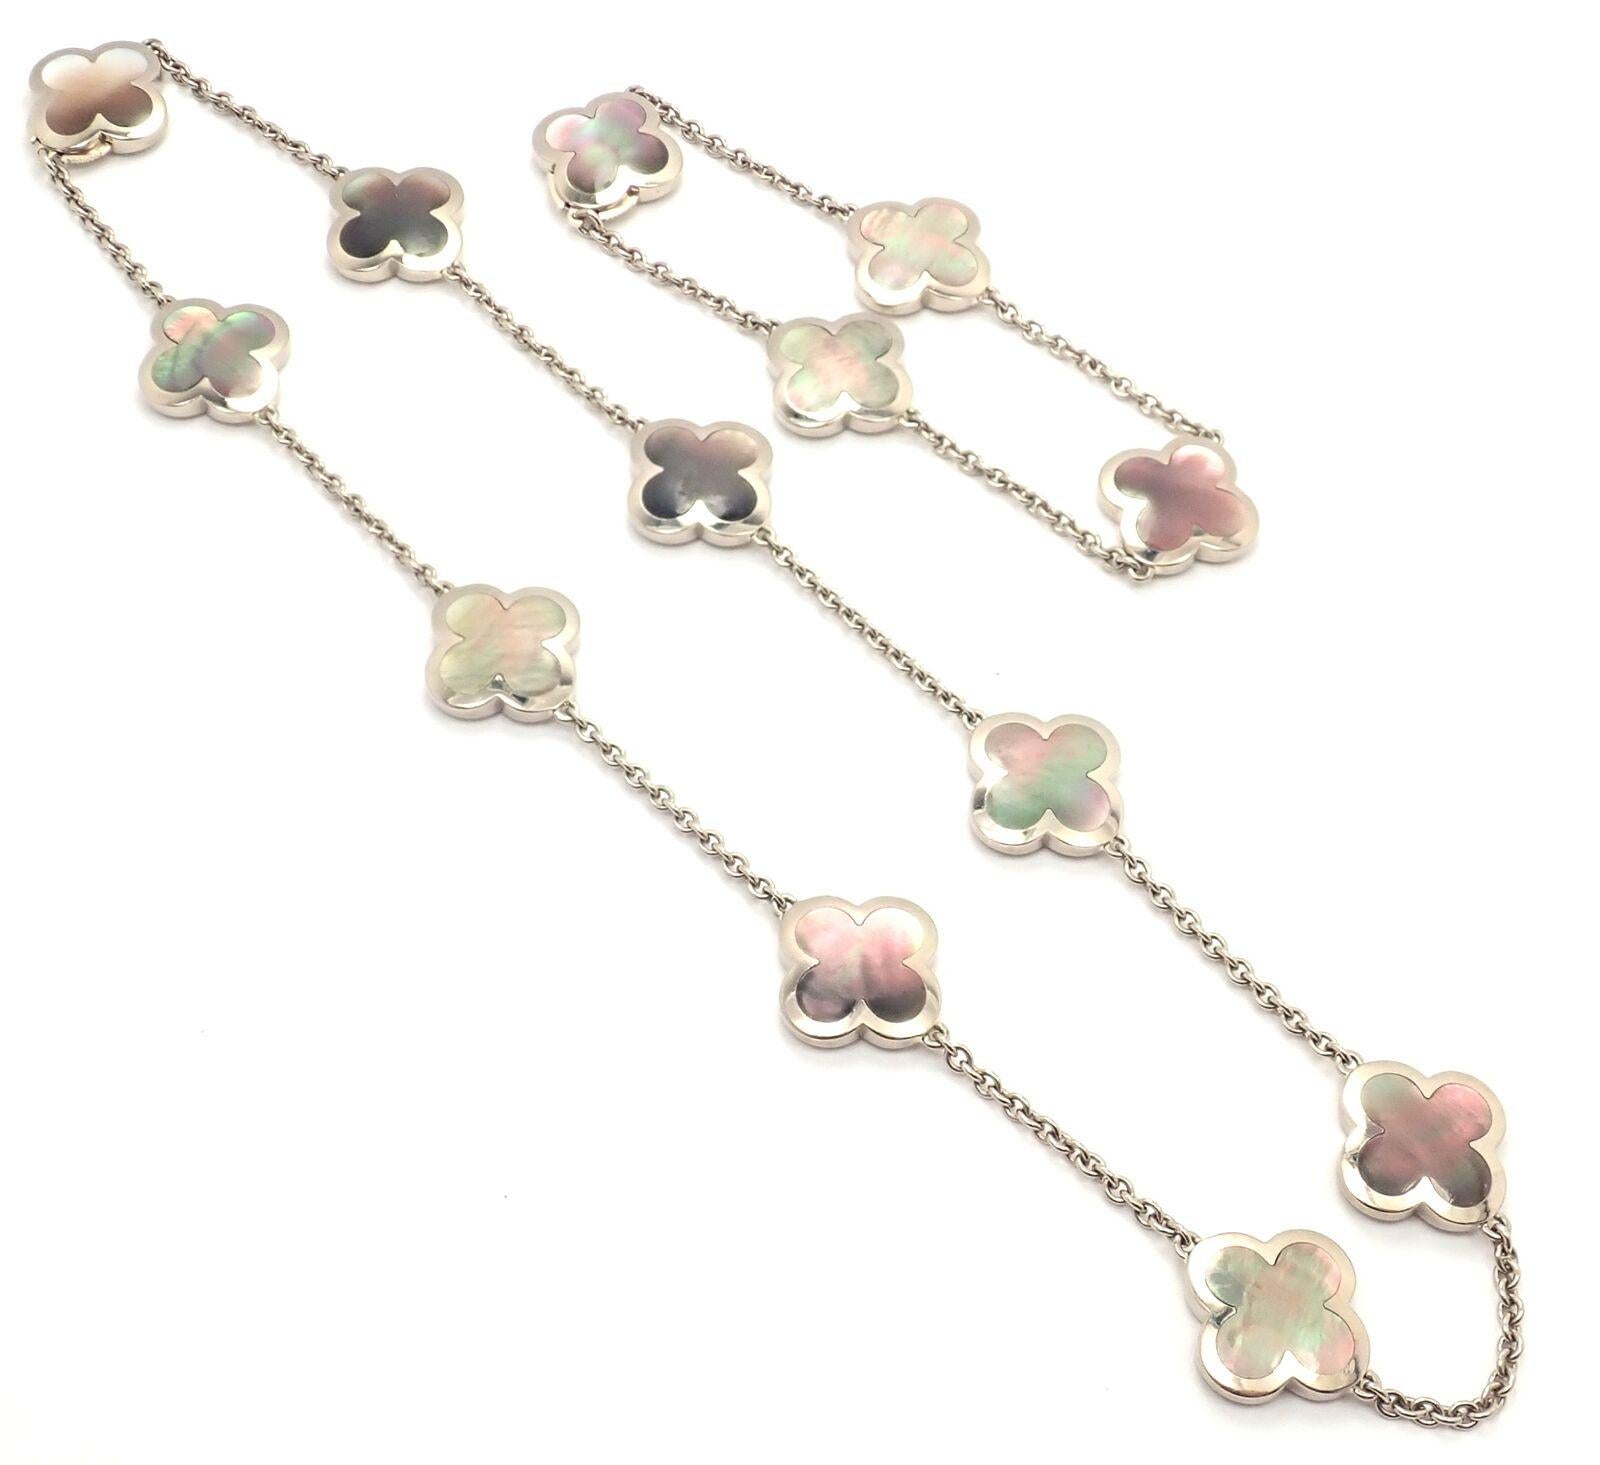 18k White Gold Pure Alhambra 9 Motifs Gray Mother Of Pearl Necklace And 4 Motifs Pure Gray Mother Of Pearl bracelet by Van Cleef & Arpels.
With 13 (9 on a necklace and 4 on a bracelet) motifs gray mother of pearl Alhambra 16mm each 
Details:
Length: